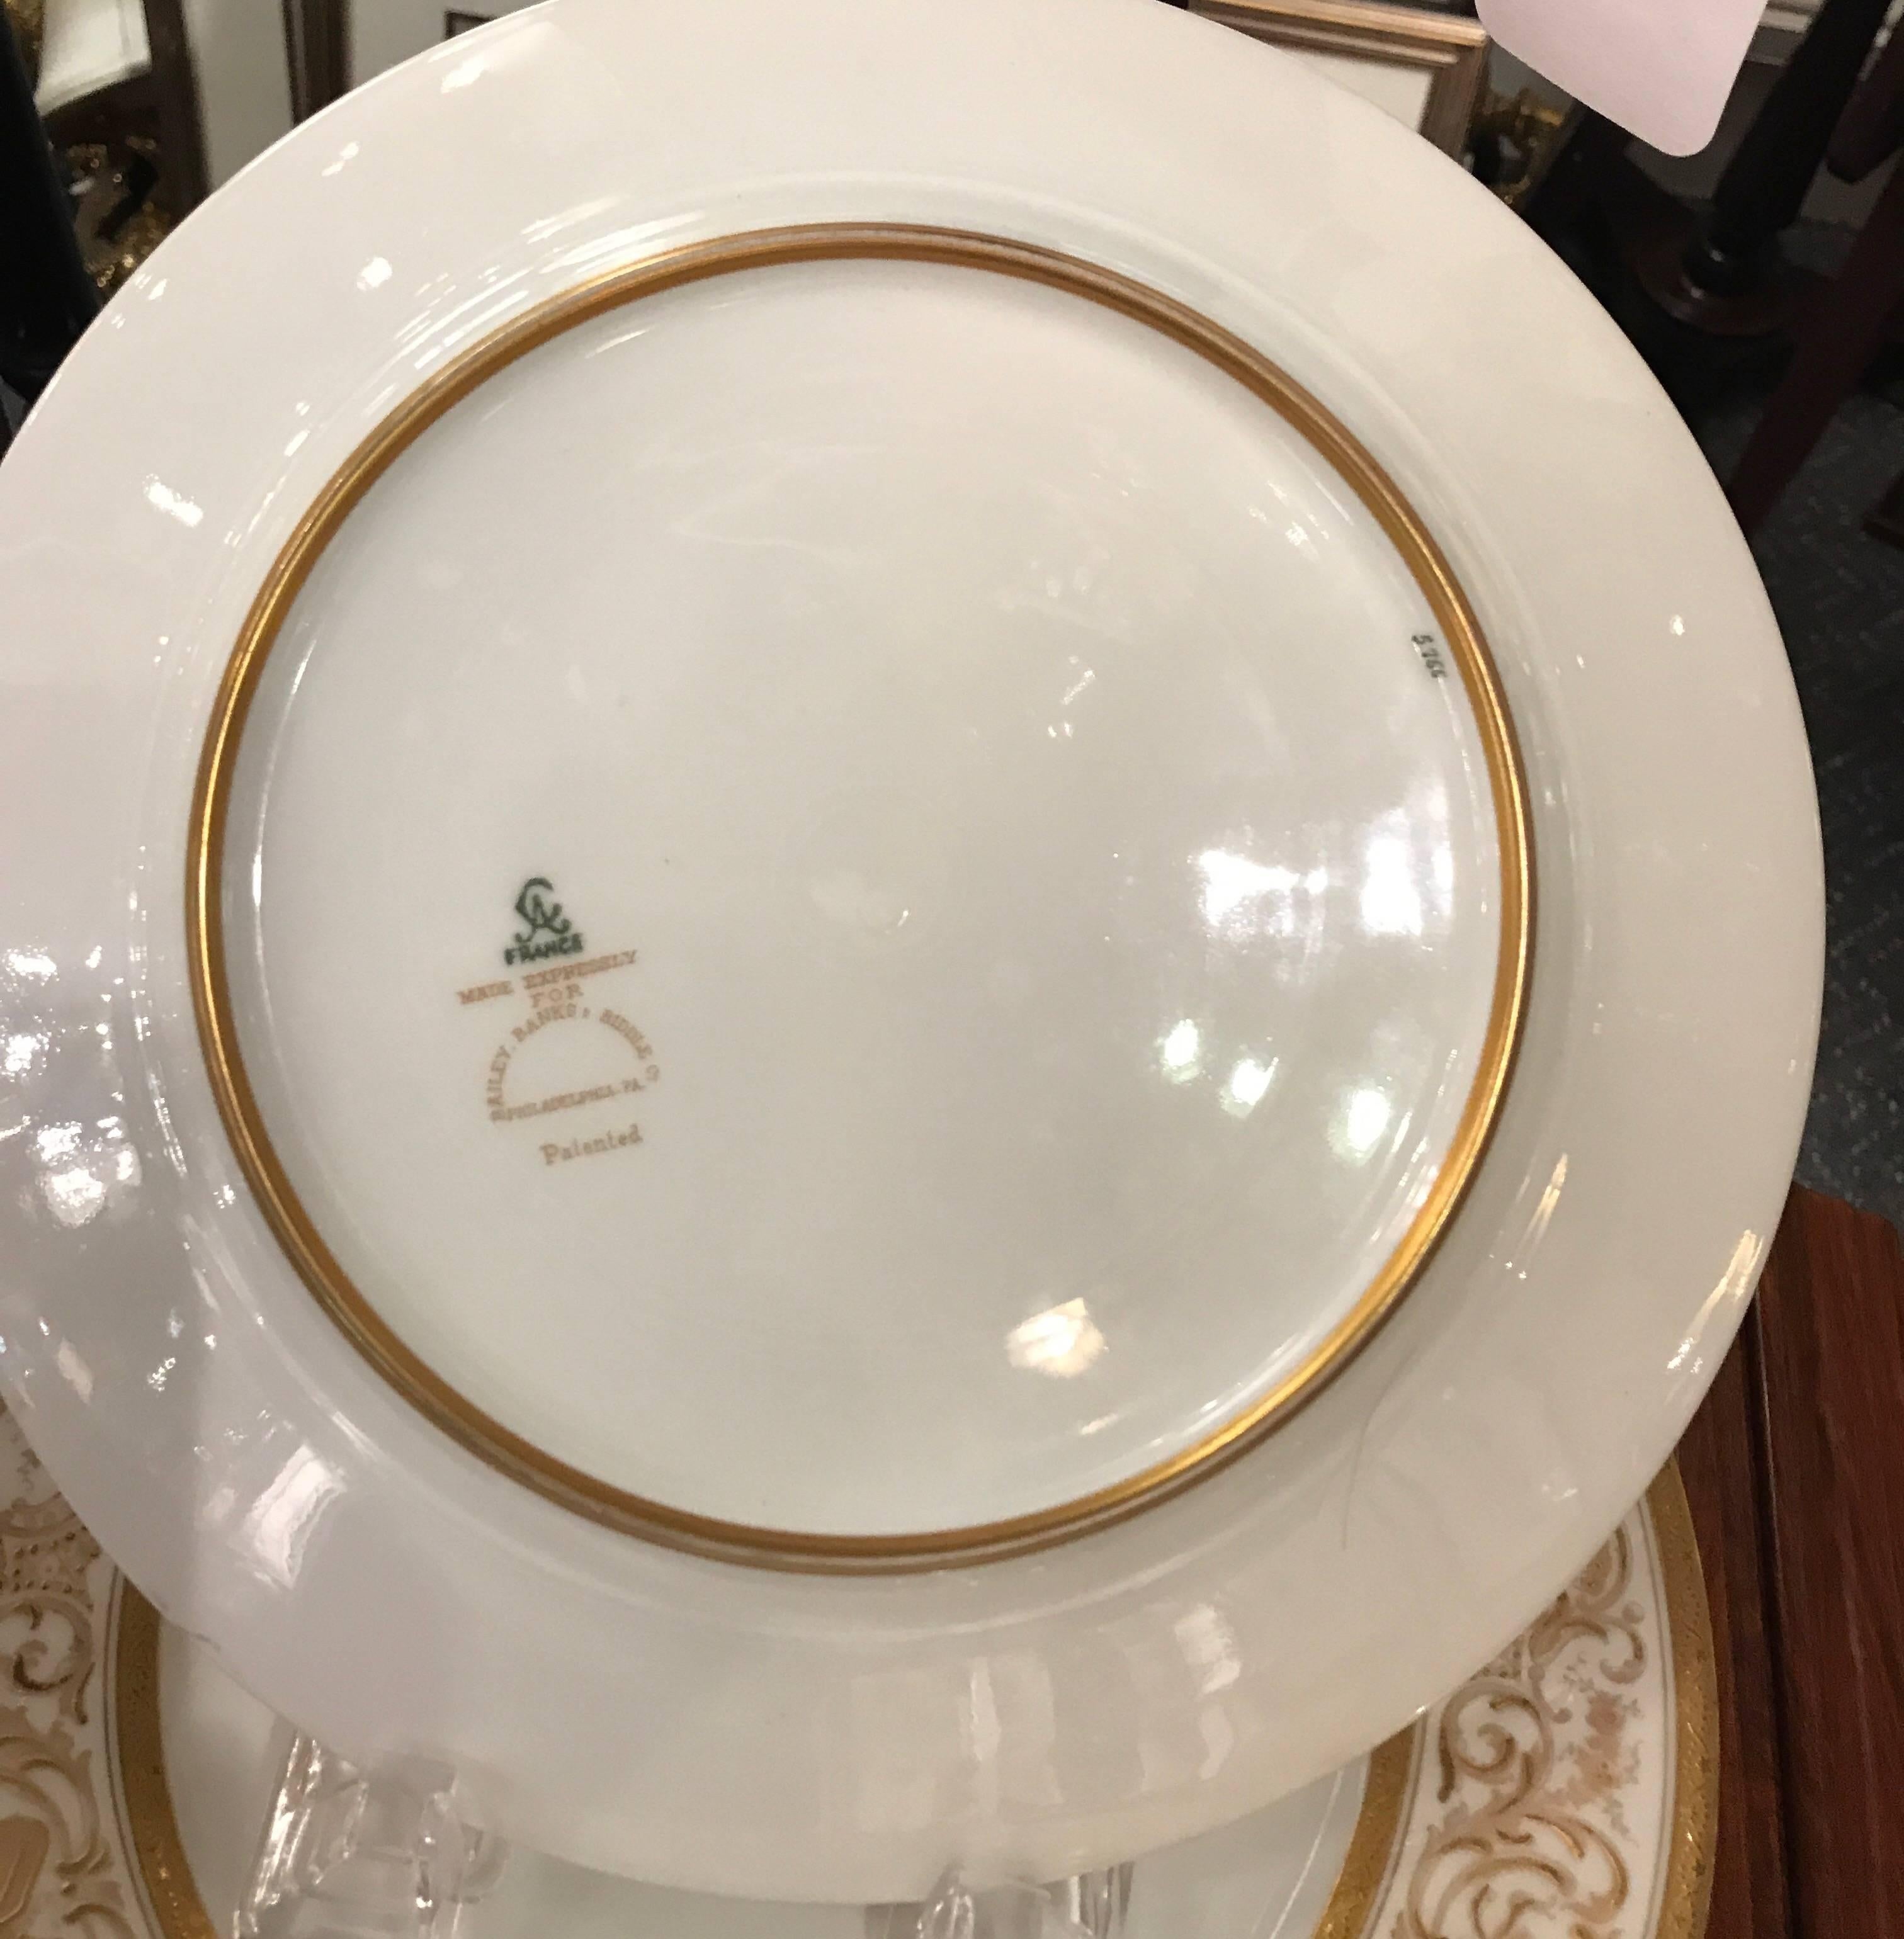 Porcelain Set of Ten French Plates with Raised Gilt Borders